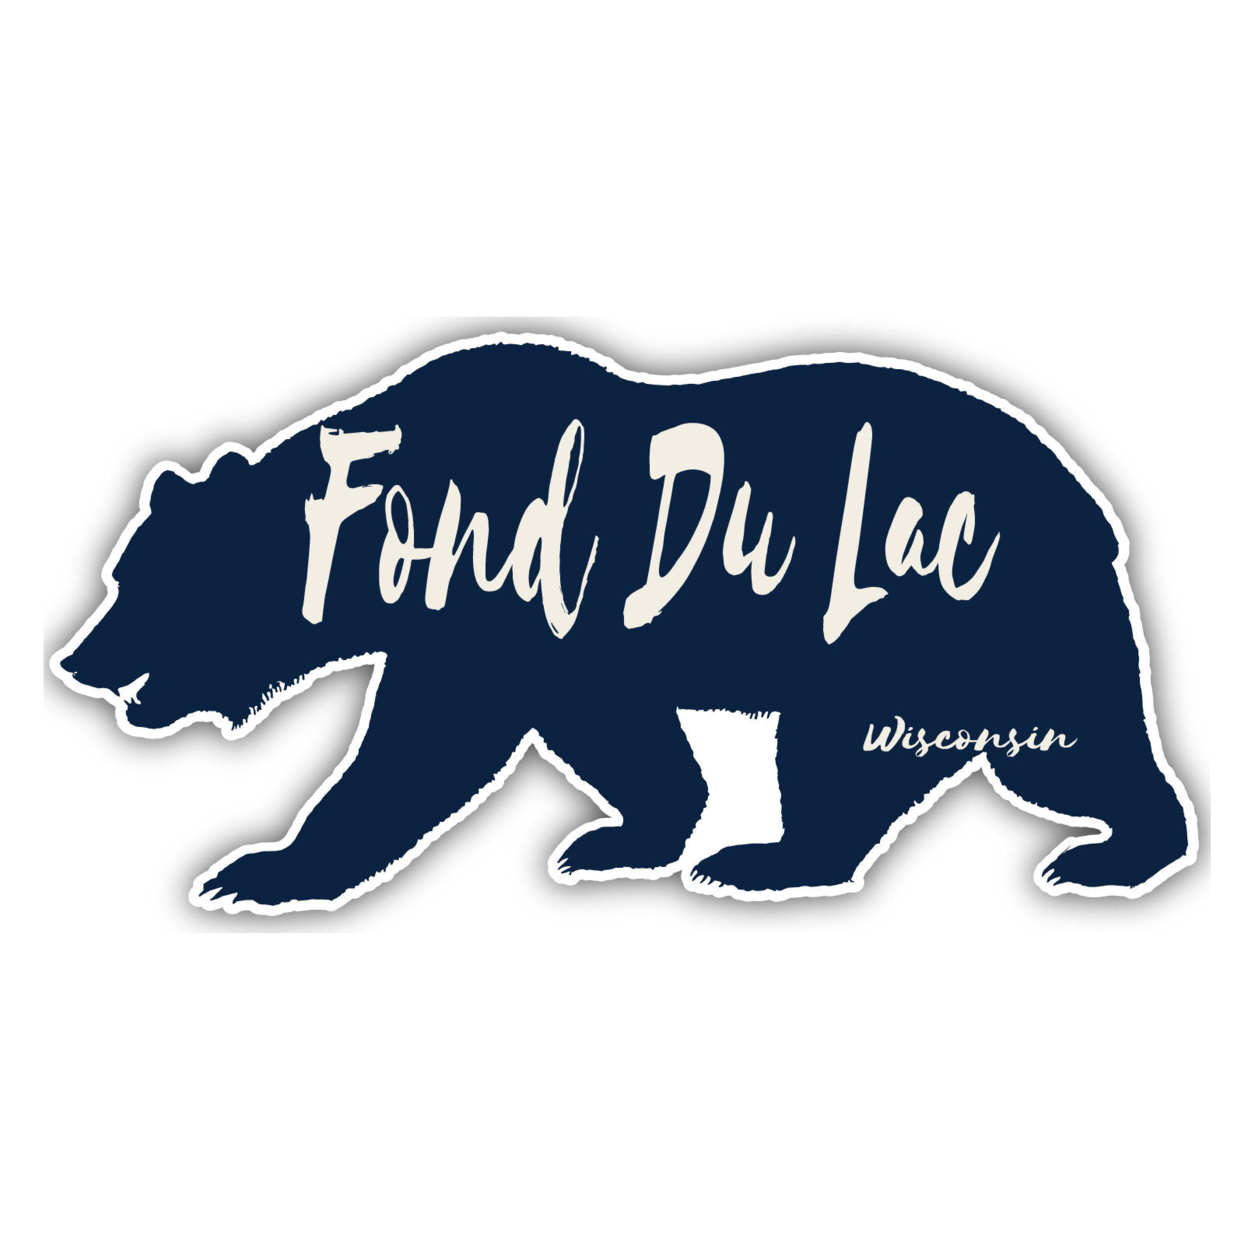 Fond Du Lac Wisconsin Souvenir Decorative Stickers (Choose Theme And Size) - Single Unit, 4-Inch, Great Outdoors